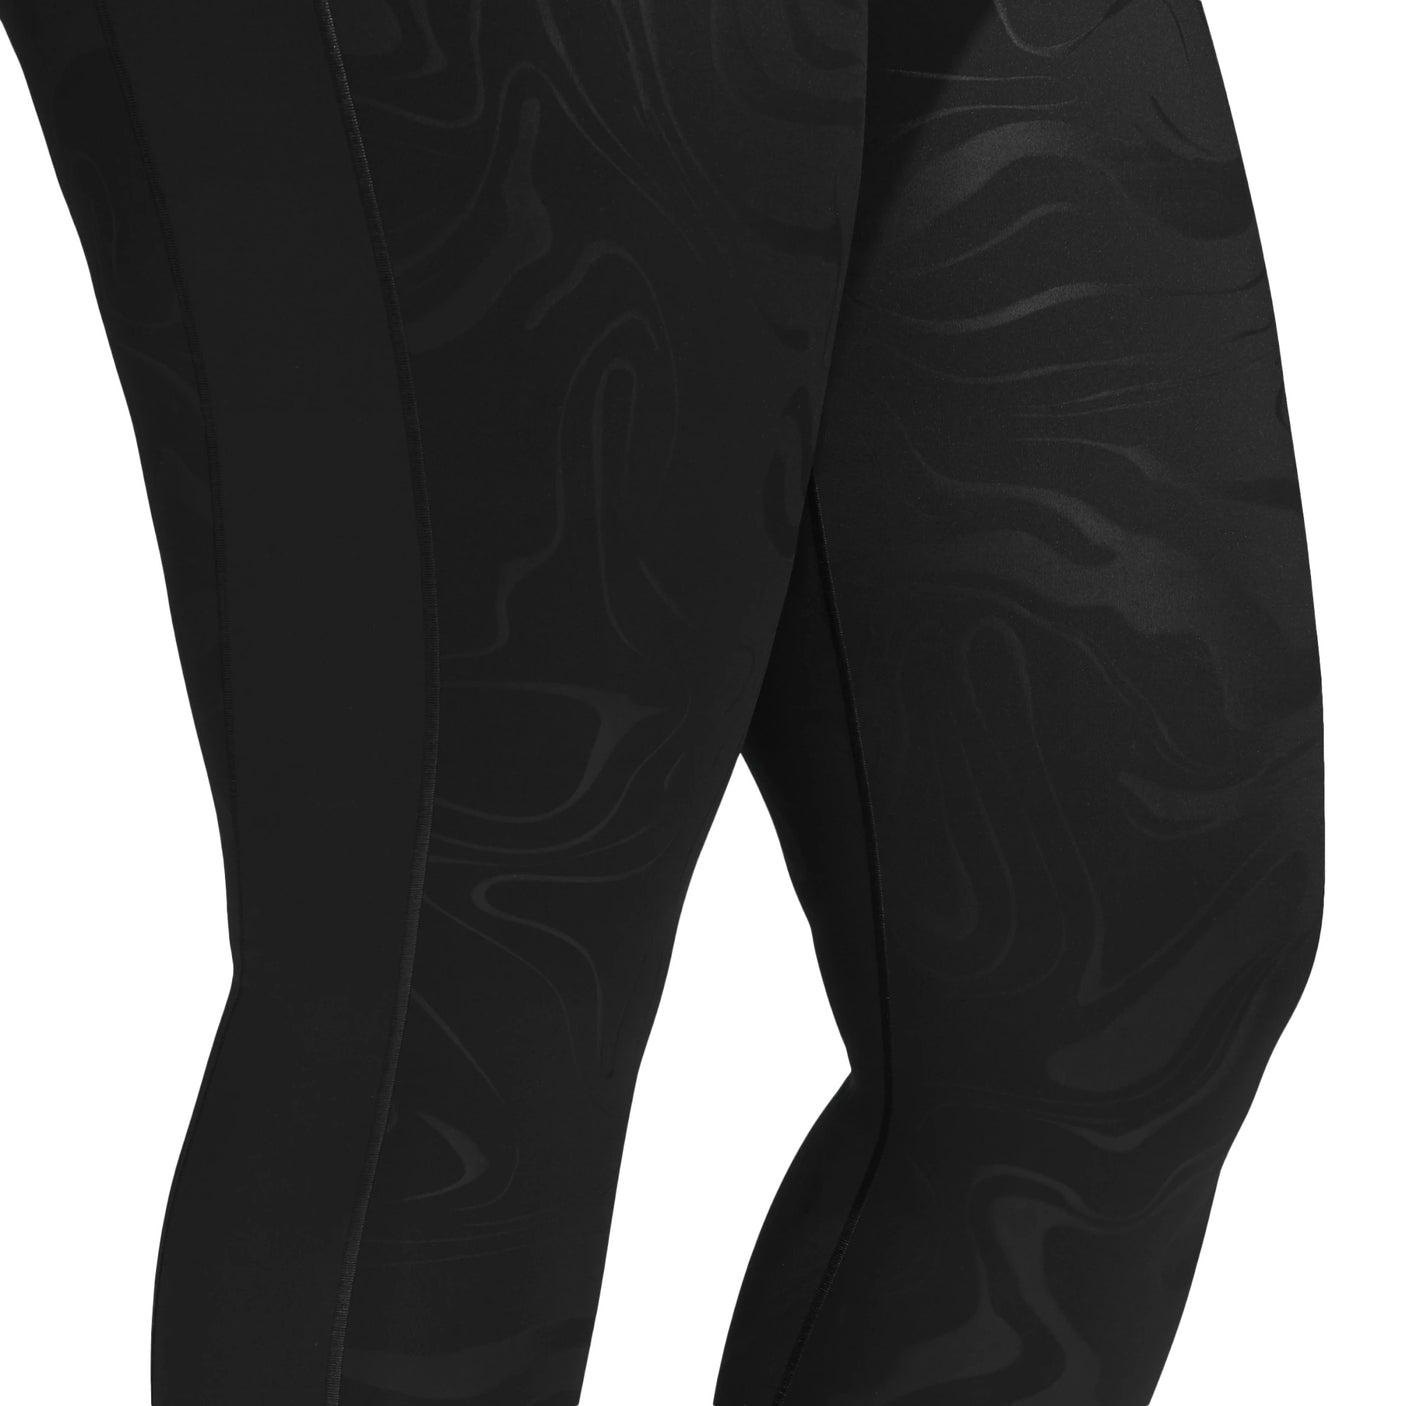 adidas Women's Believe This Glam On Long Tights (Plus Size) Black